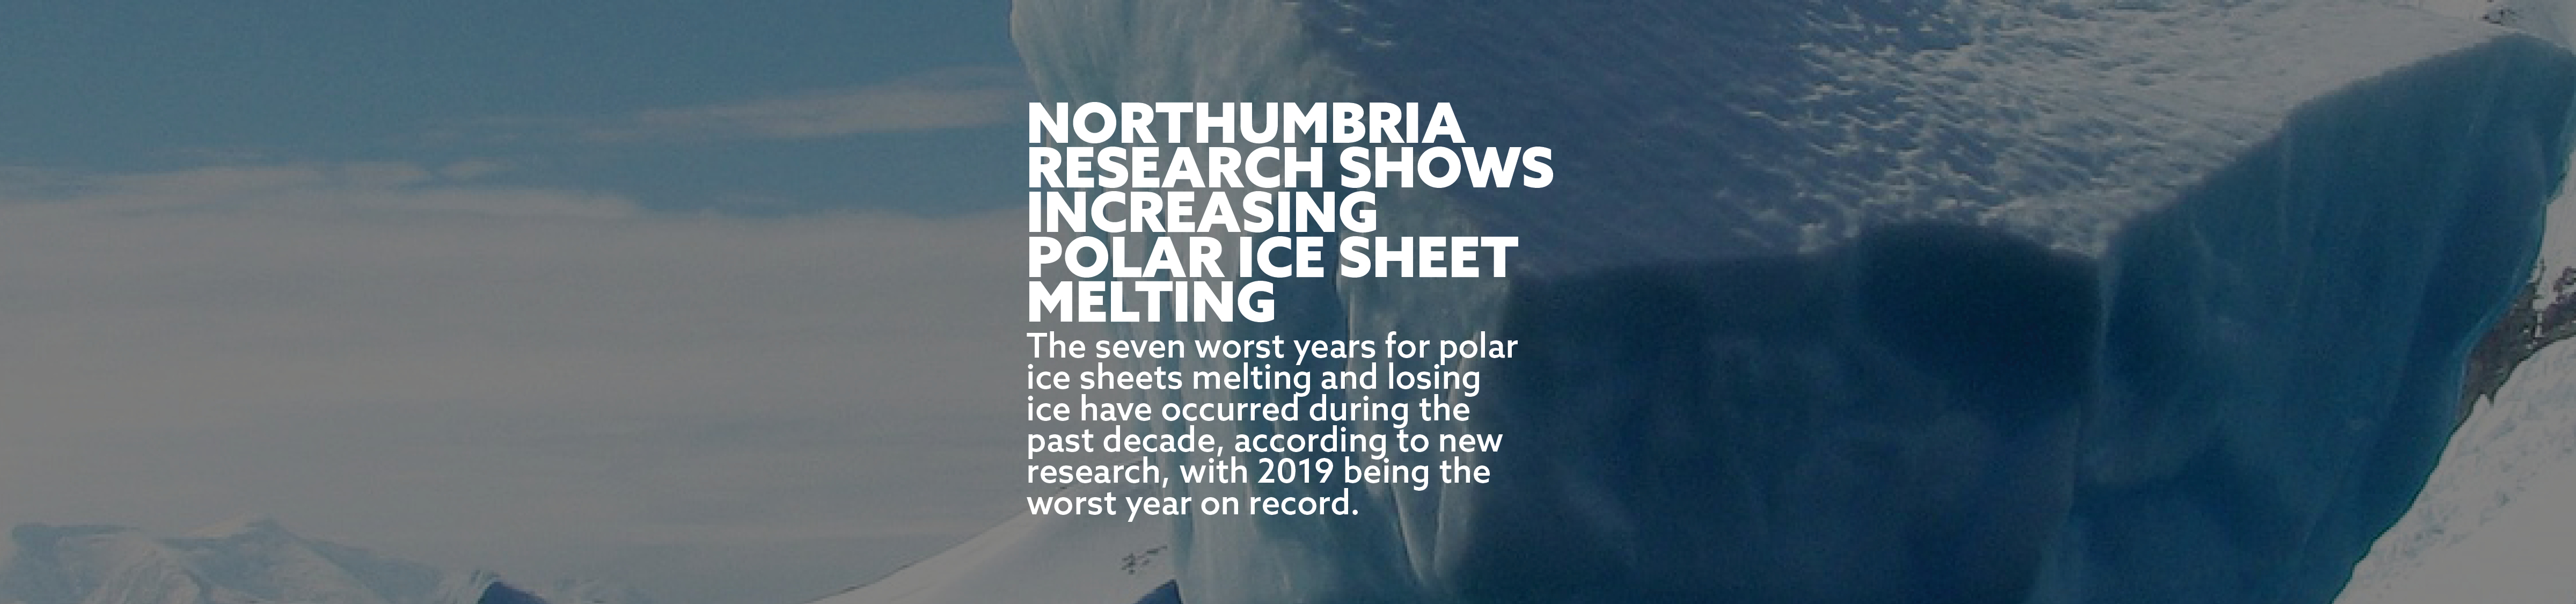 Northumbria research shows increasing polar ice sheet melting